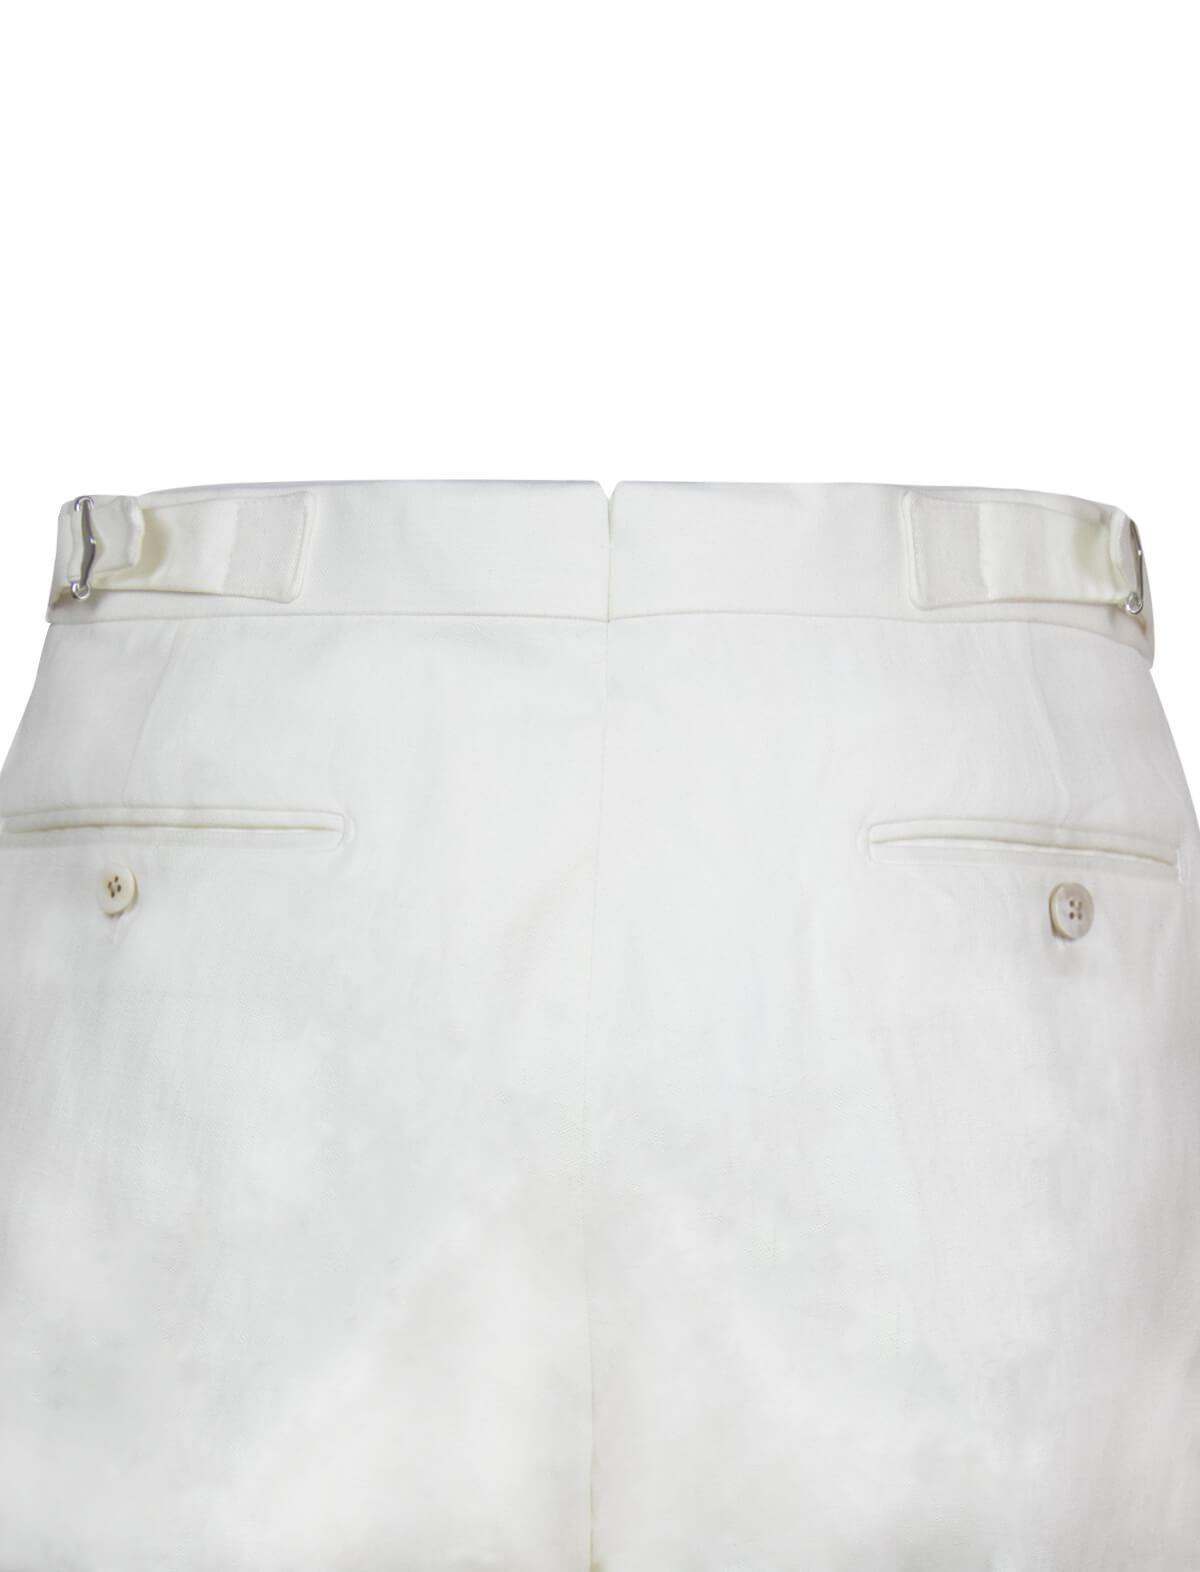 CARUSO Hopsack Cotton Blend Pleated Pants in Cream | CLOSET Singapore